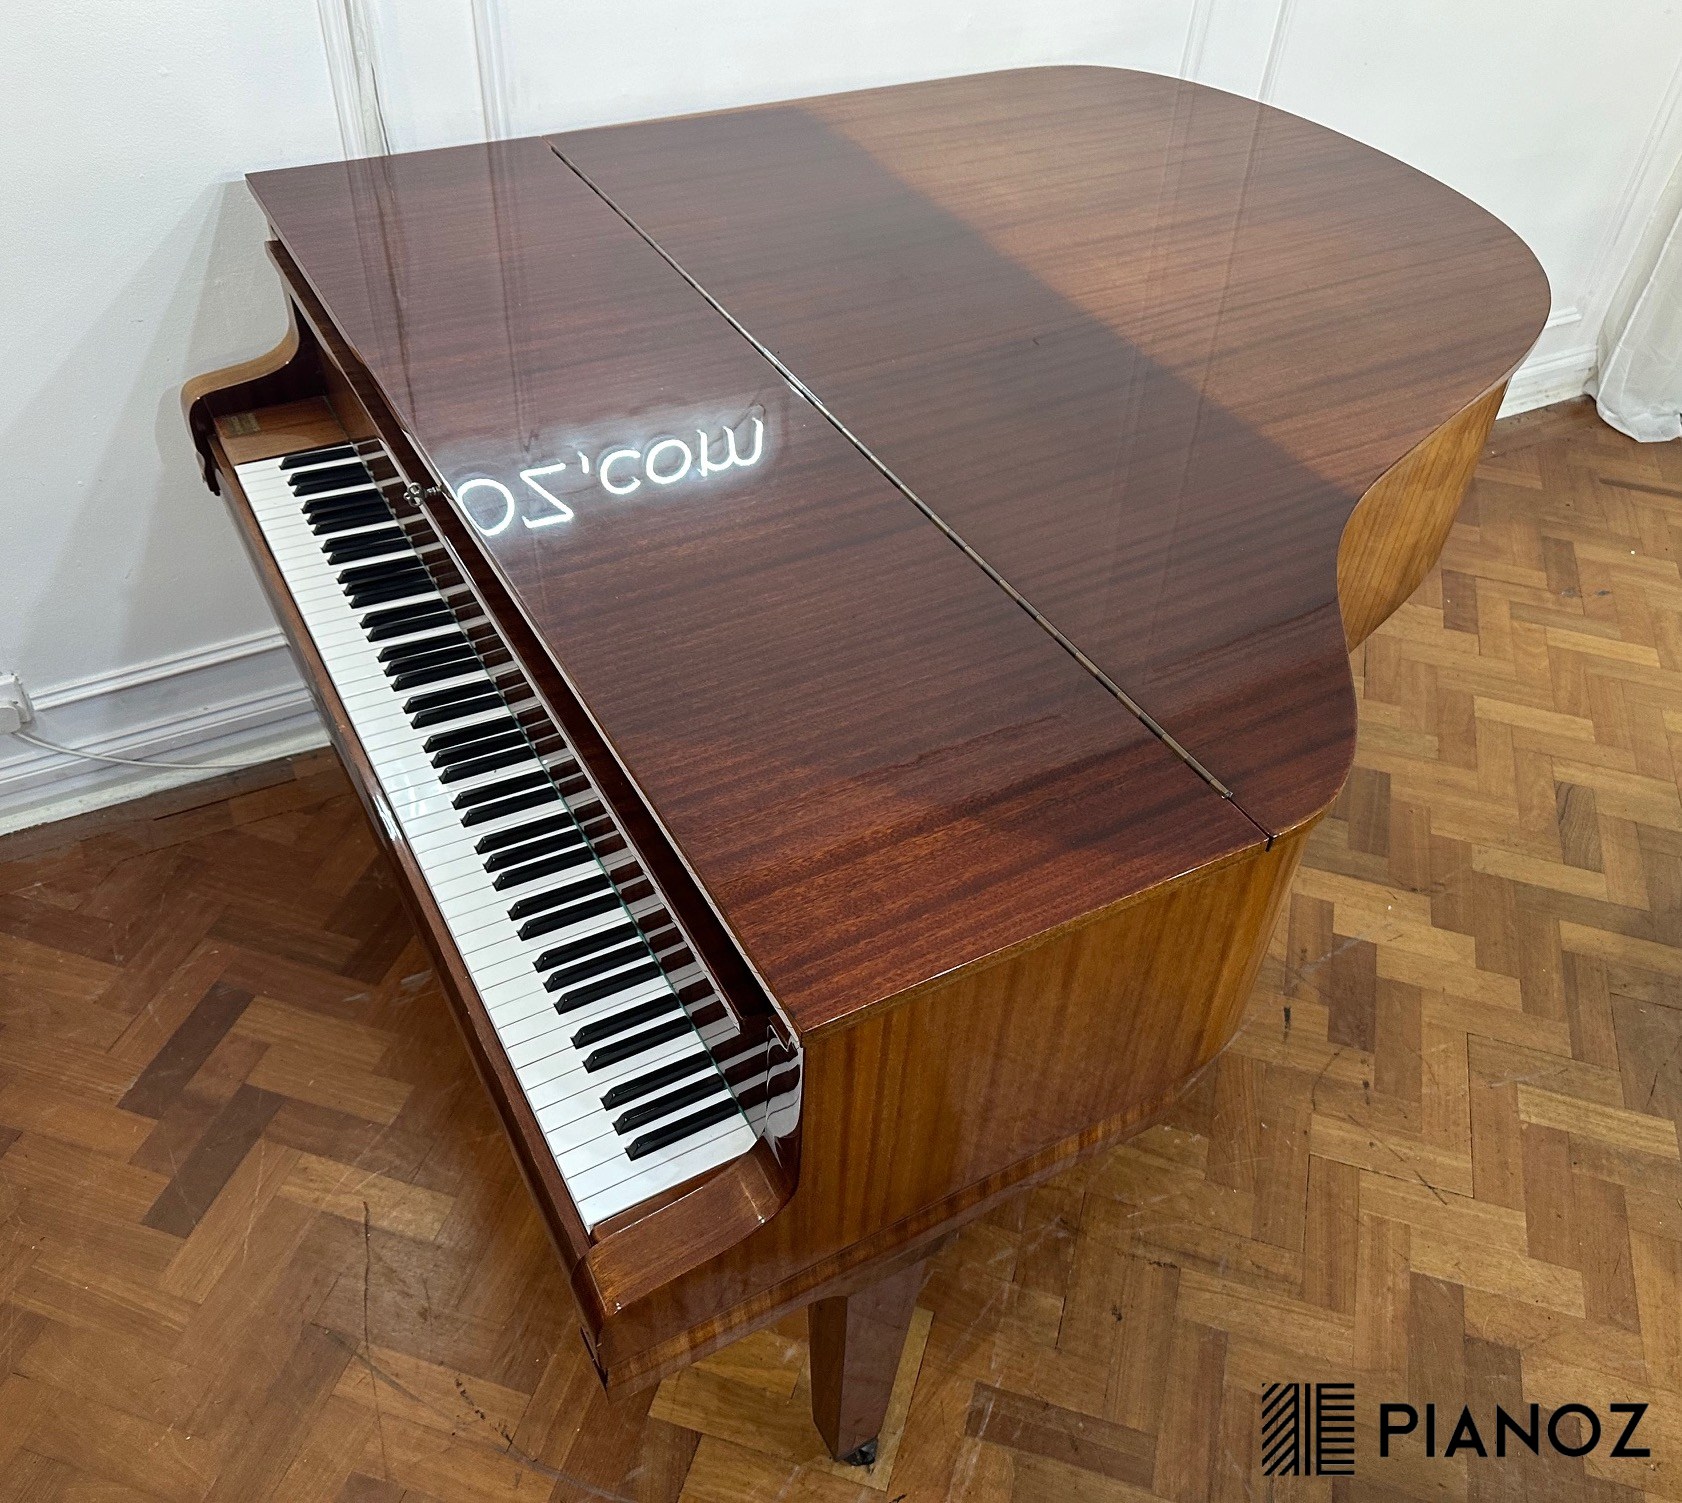 August Förster 170 Baby Grand Piano piano for sale in UK